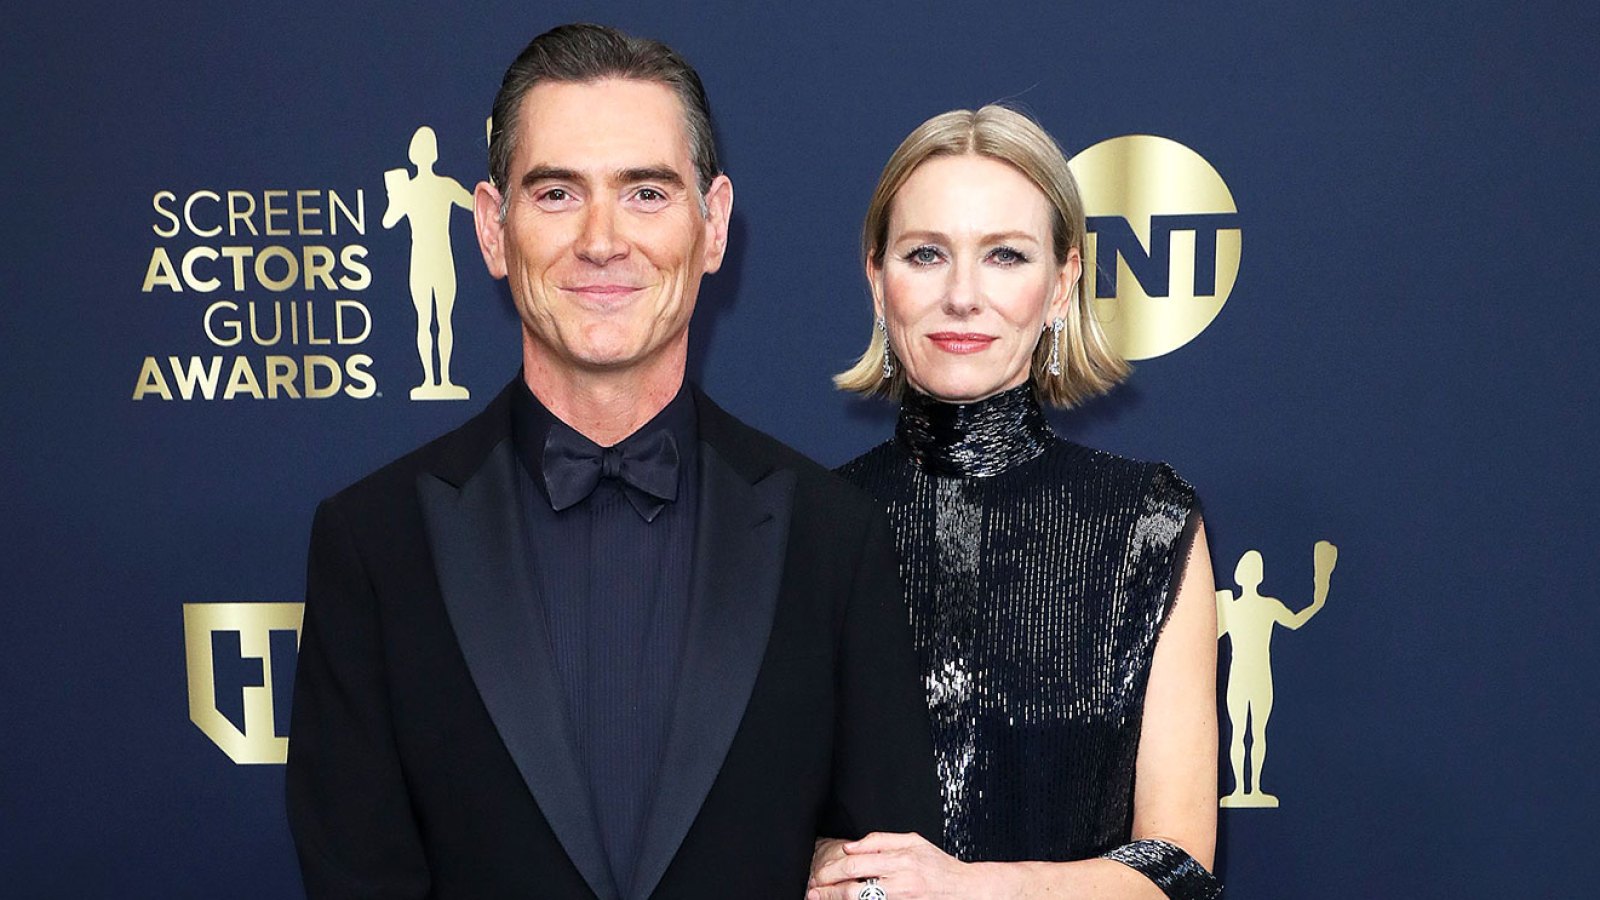 Naomi Watts Teases Whether She Would Make a Cameo on The Morning Show Alongside Boyfriend Billy Crudup